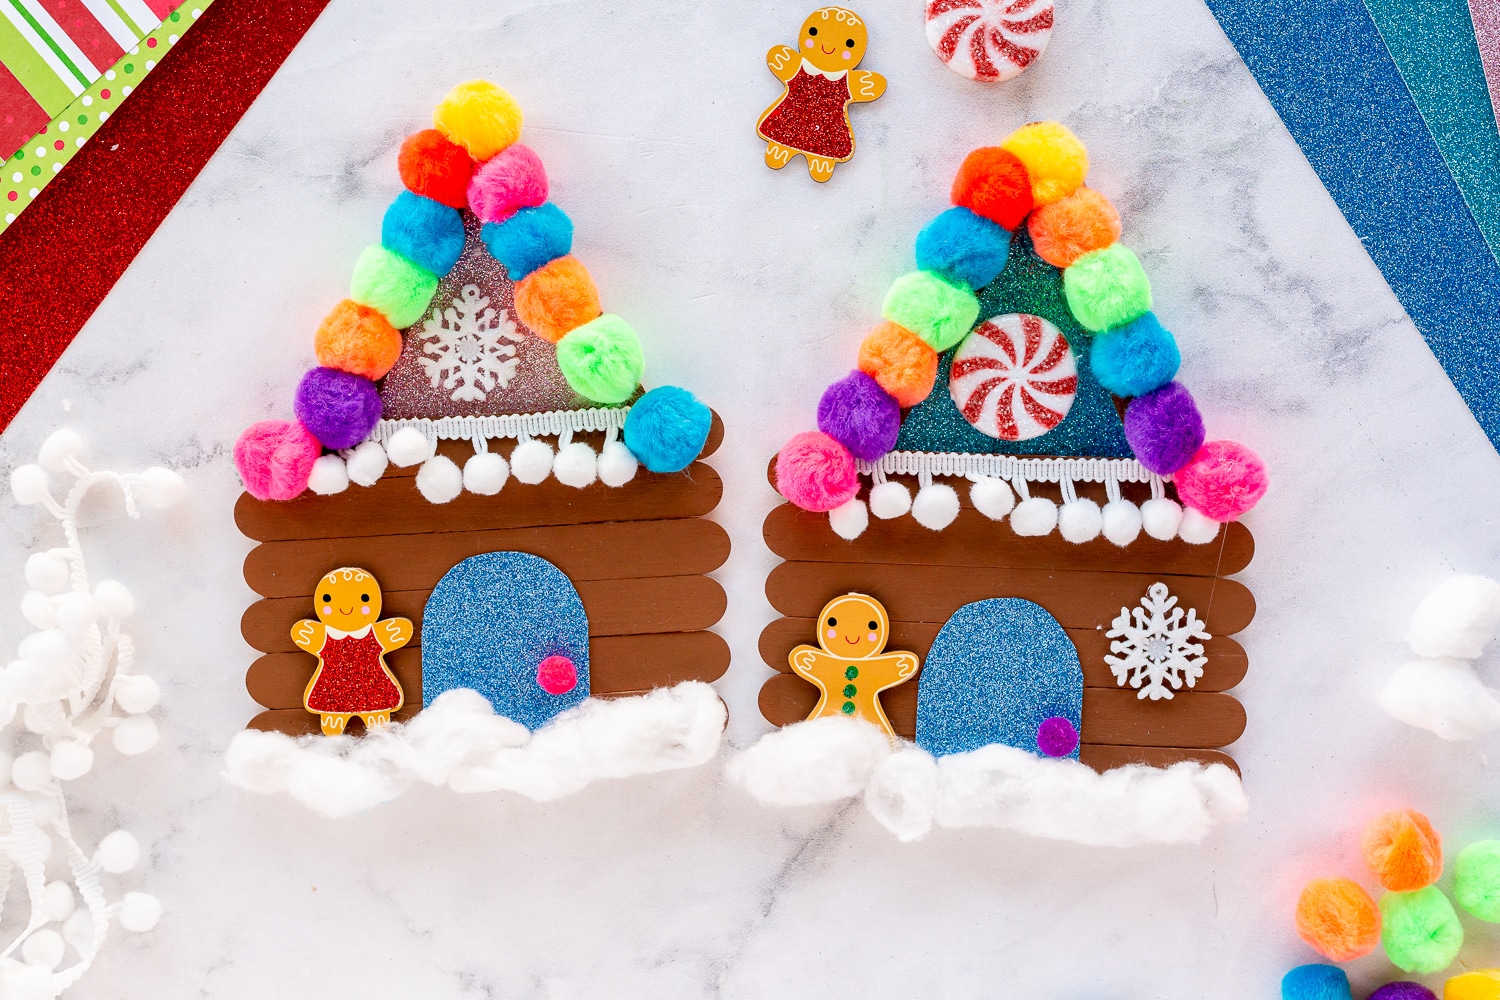 Popsicle Stick Gingerbread Houses with wooden girl and boy gingerbread men